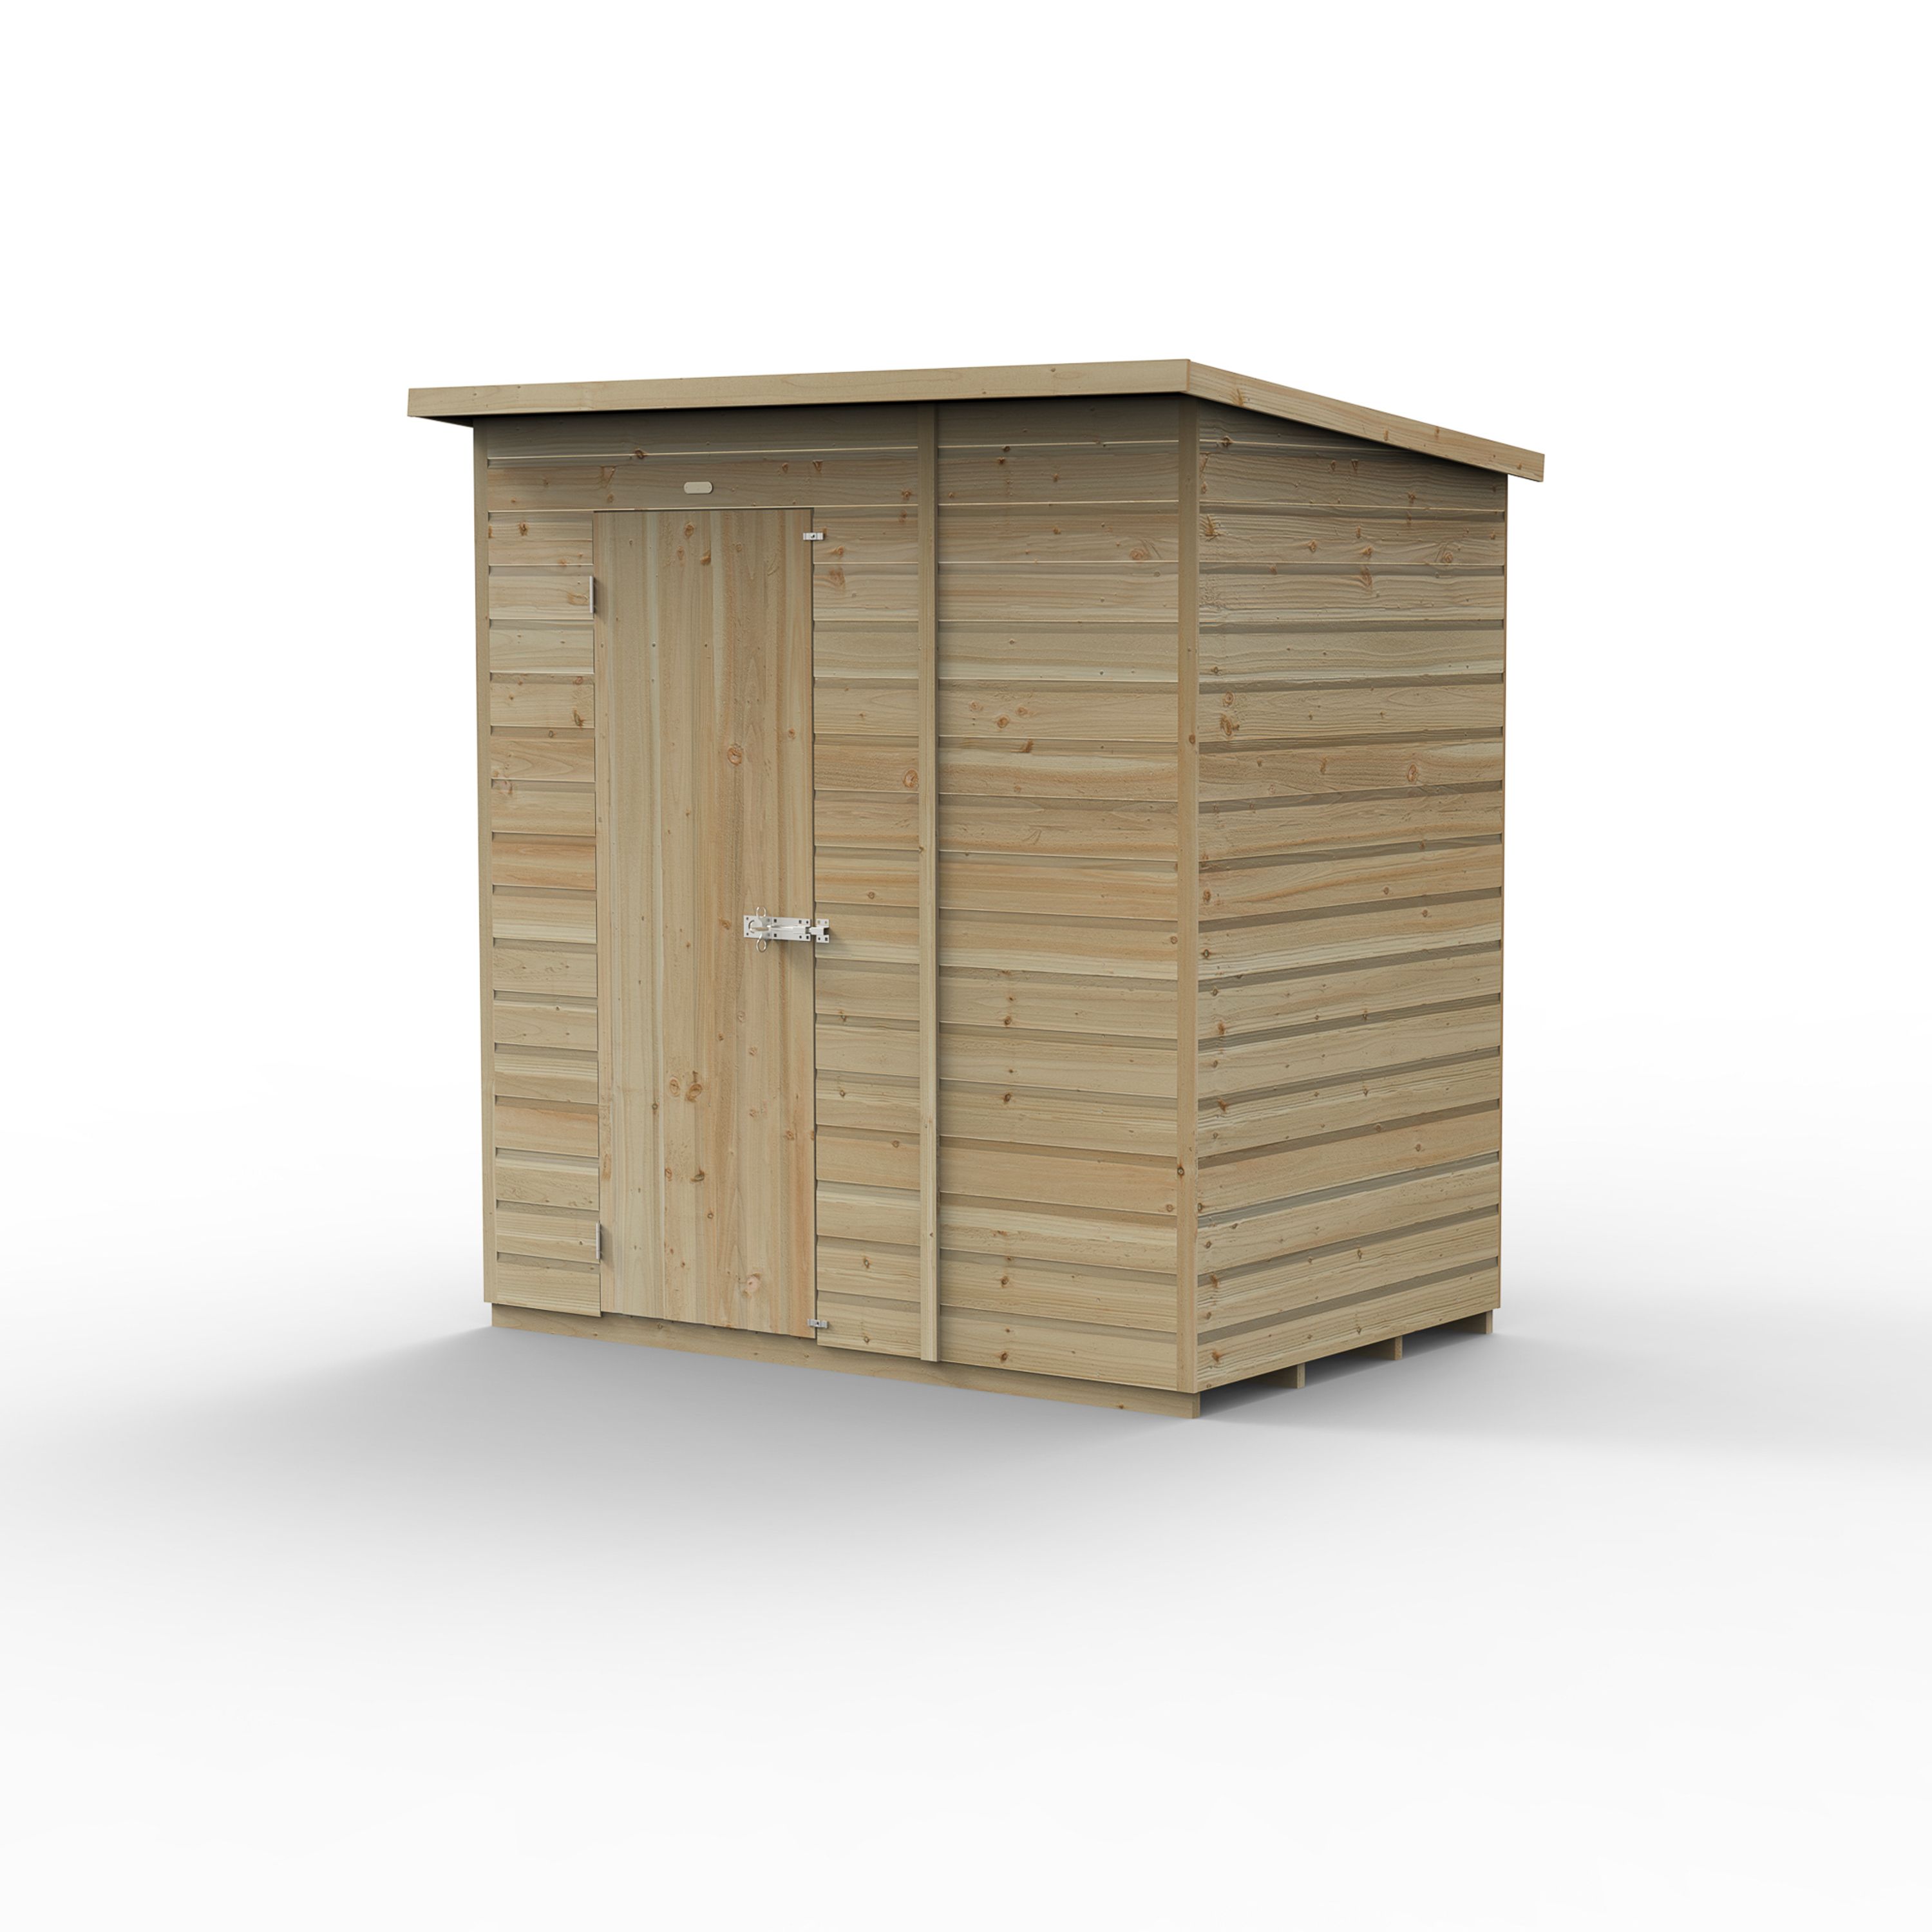 Forest Garden Beckwood 6x4 ft Pent Natural timber Wooden Shed with floor - Assembly not required